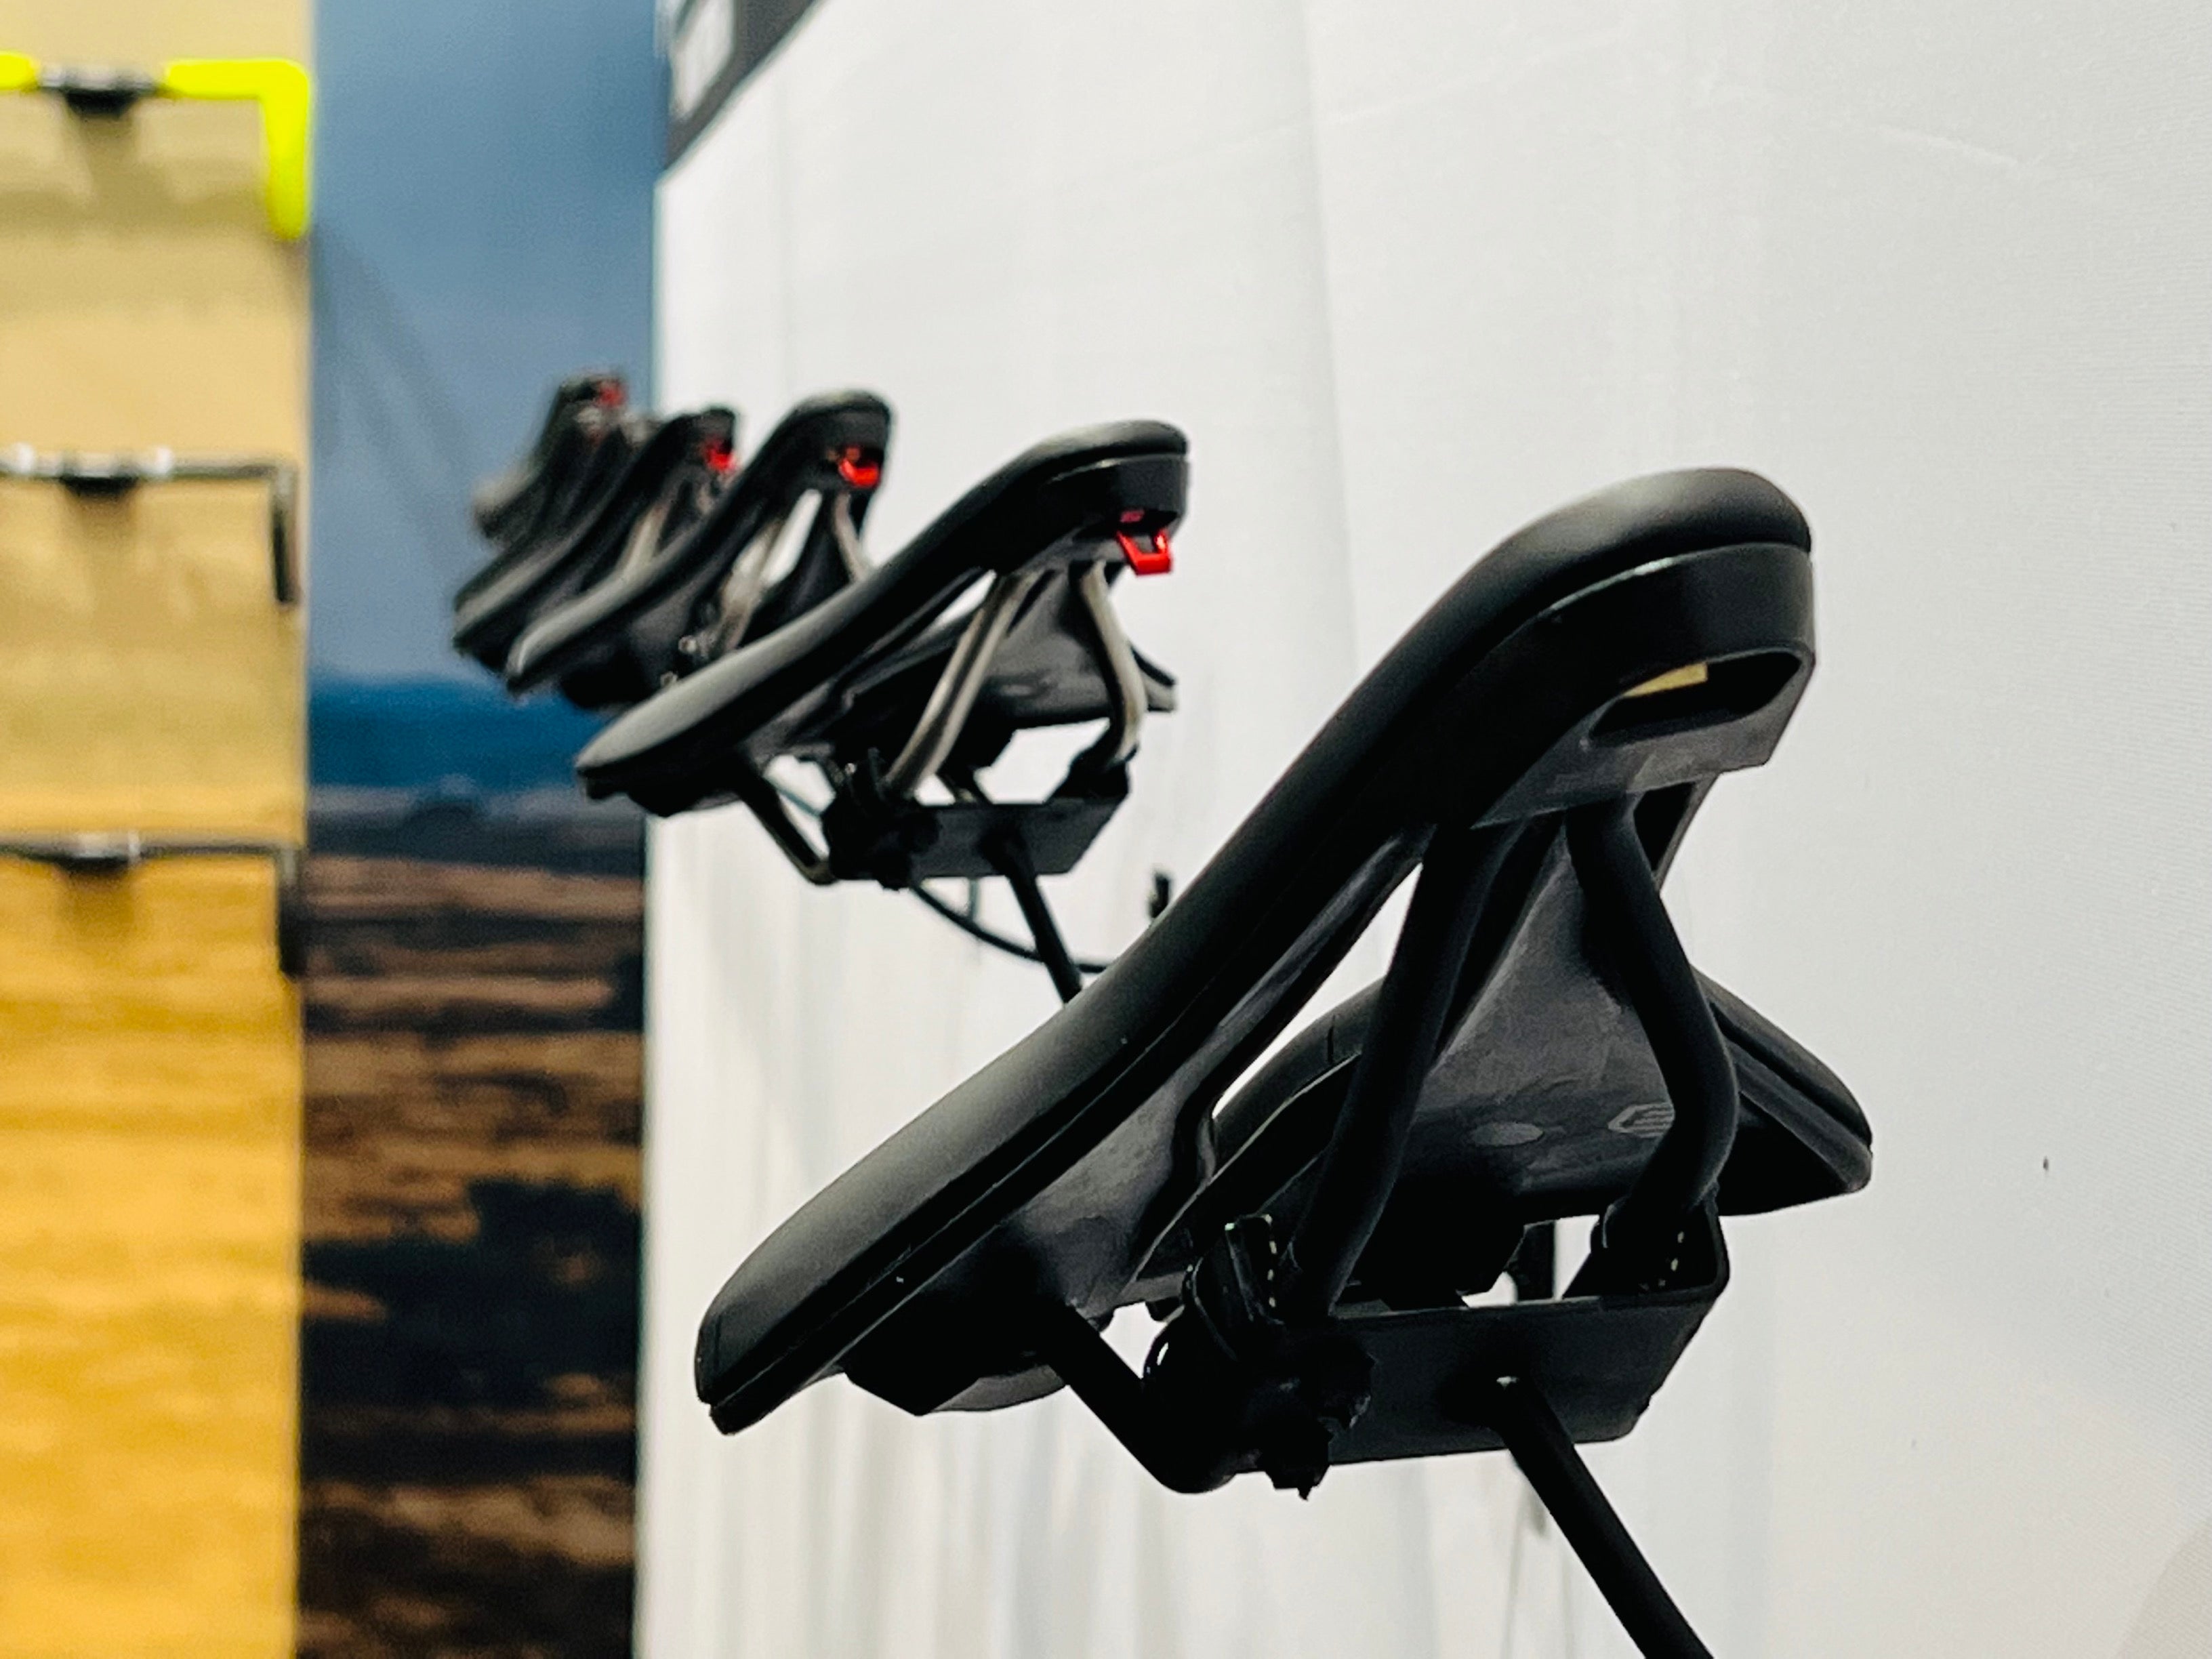 Let us introduce you to... our new saddle line up!